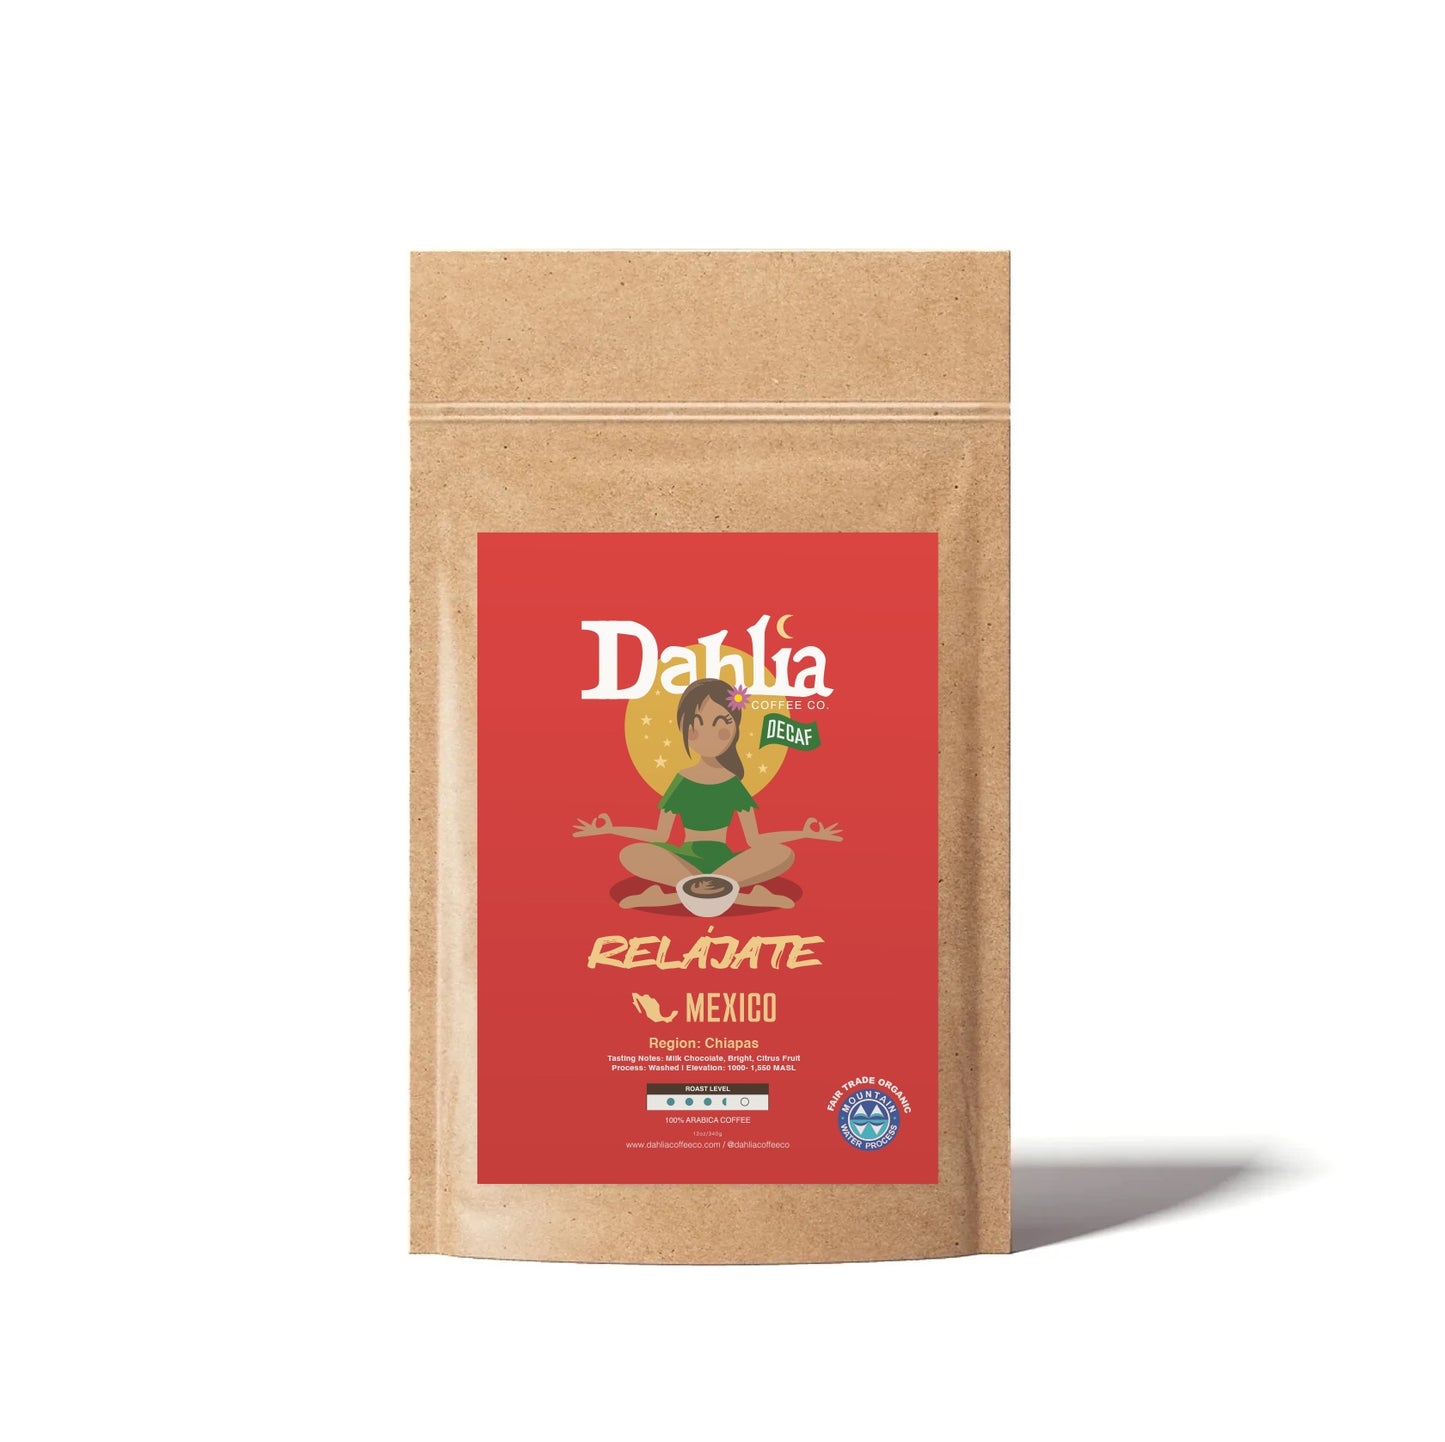 RELAJATE Mexico Decaf